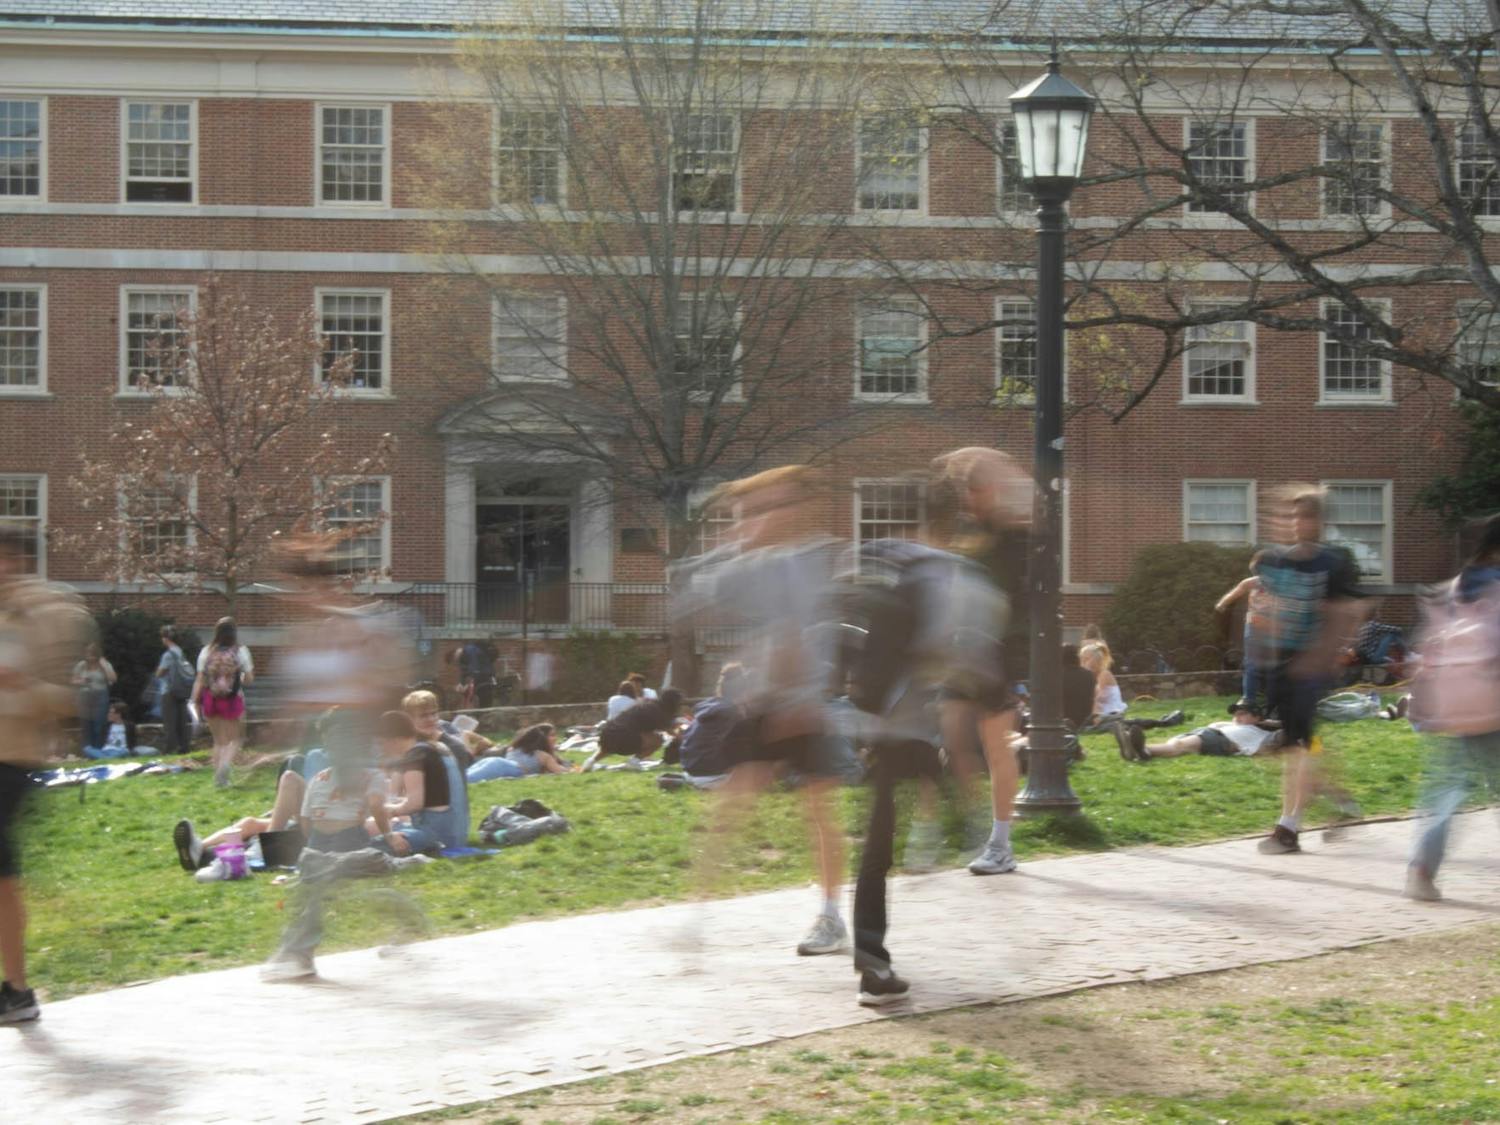 A blur of students traverses the university grounds on Monday, March 6, 2022.